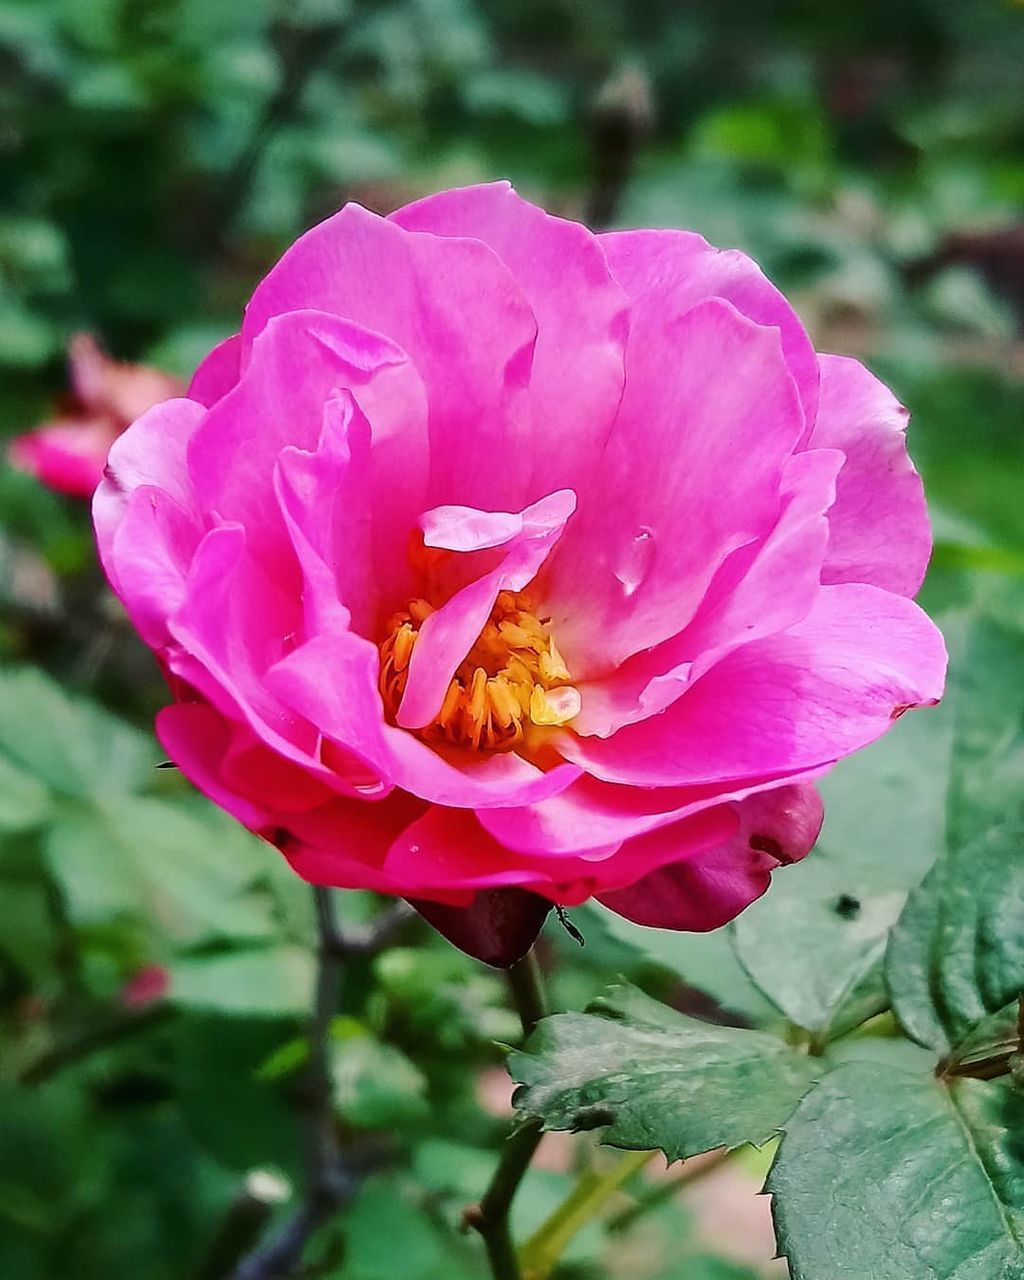 flower, flowering plant, petal, beauty in nature, freshness, plant, fragility, vulnerability, flower head, inflorescence, pink color, close-up, growth, focus on foreground, nature, day, pollen, no people, rose, outdoors